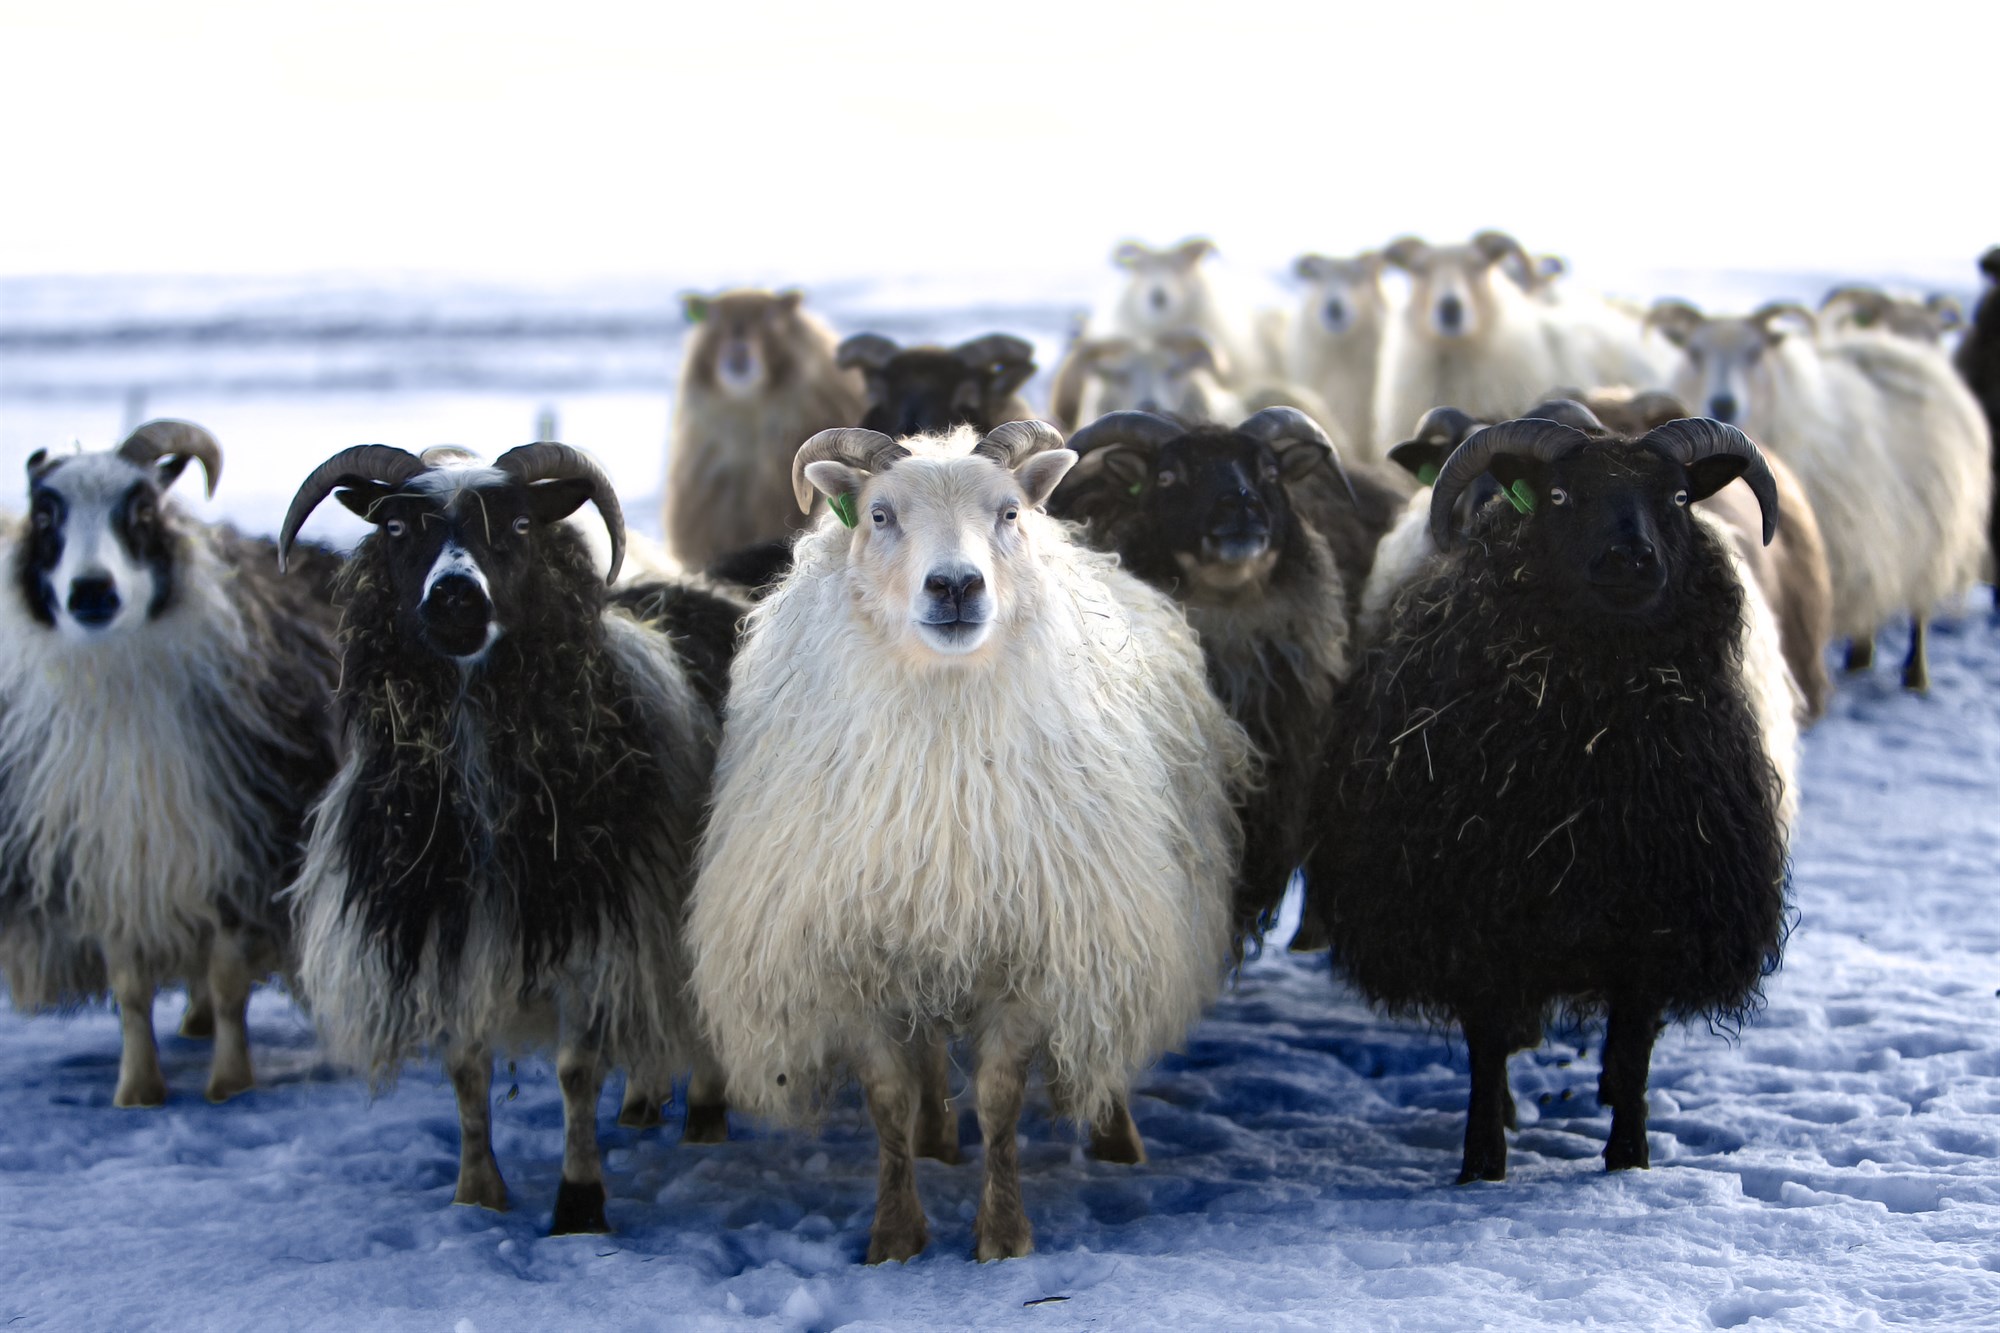 The Icelandic sheep plays an in imporant role in Icelandic culture and Þorri